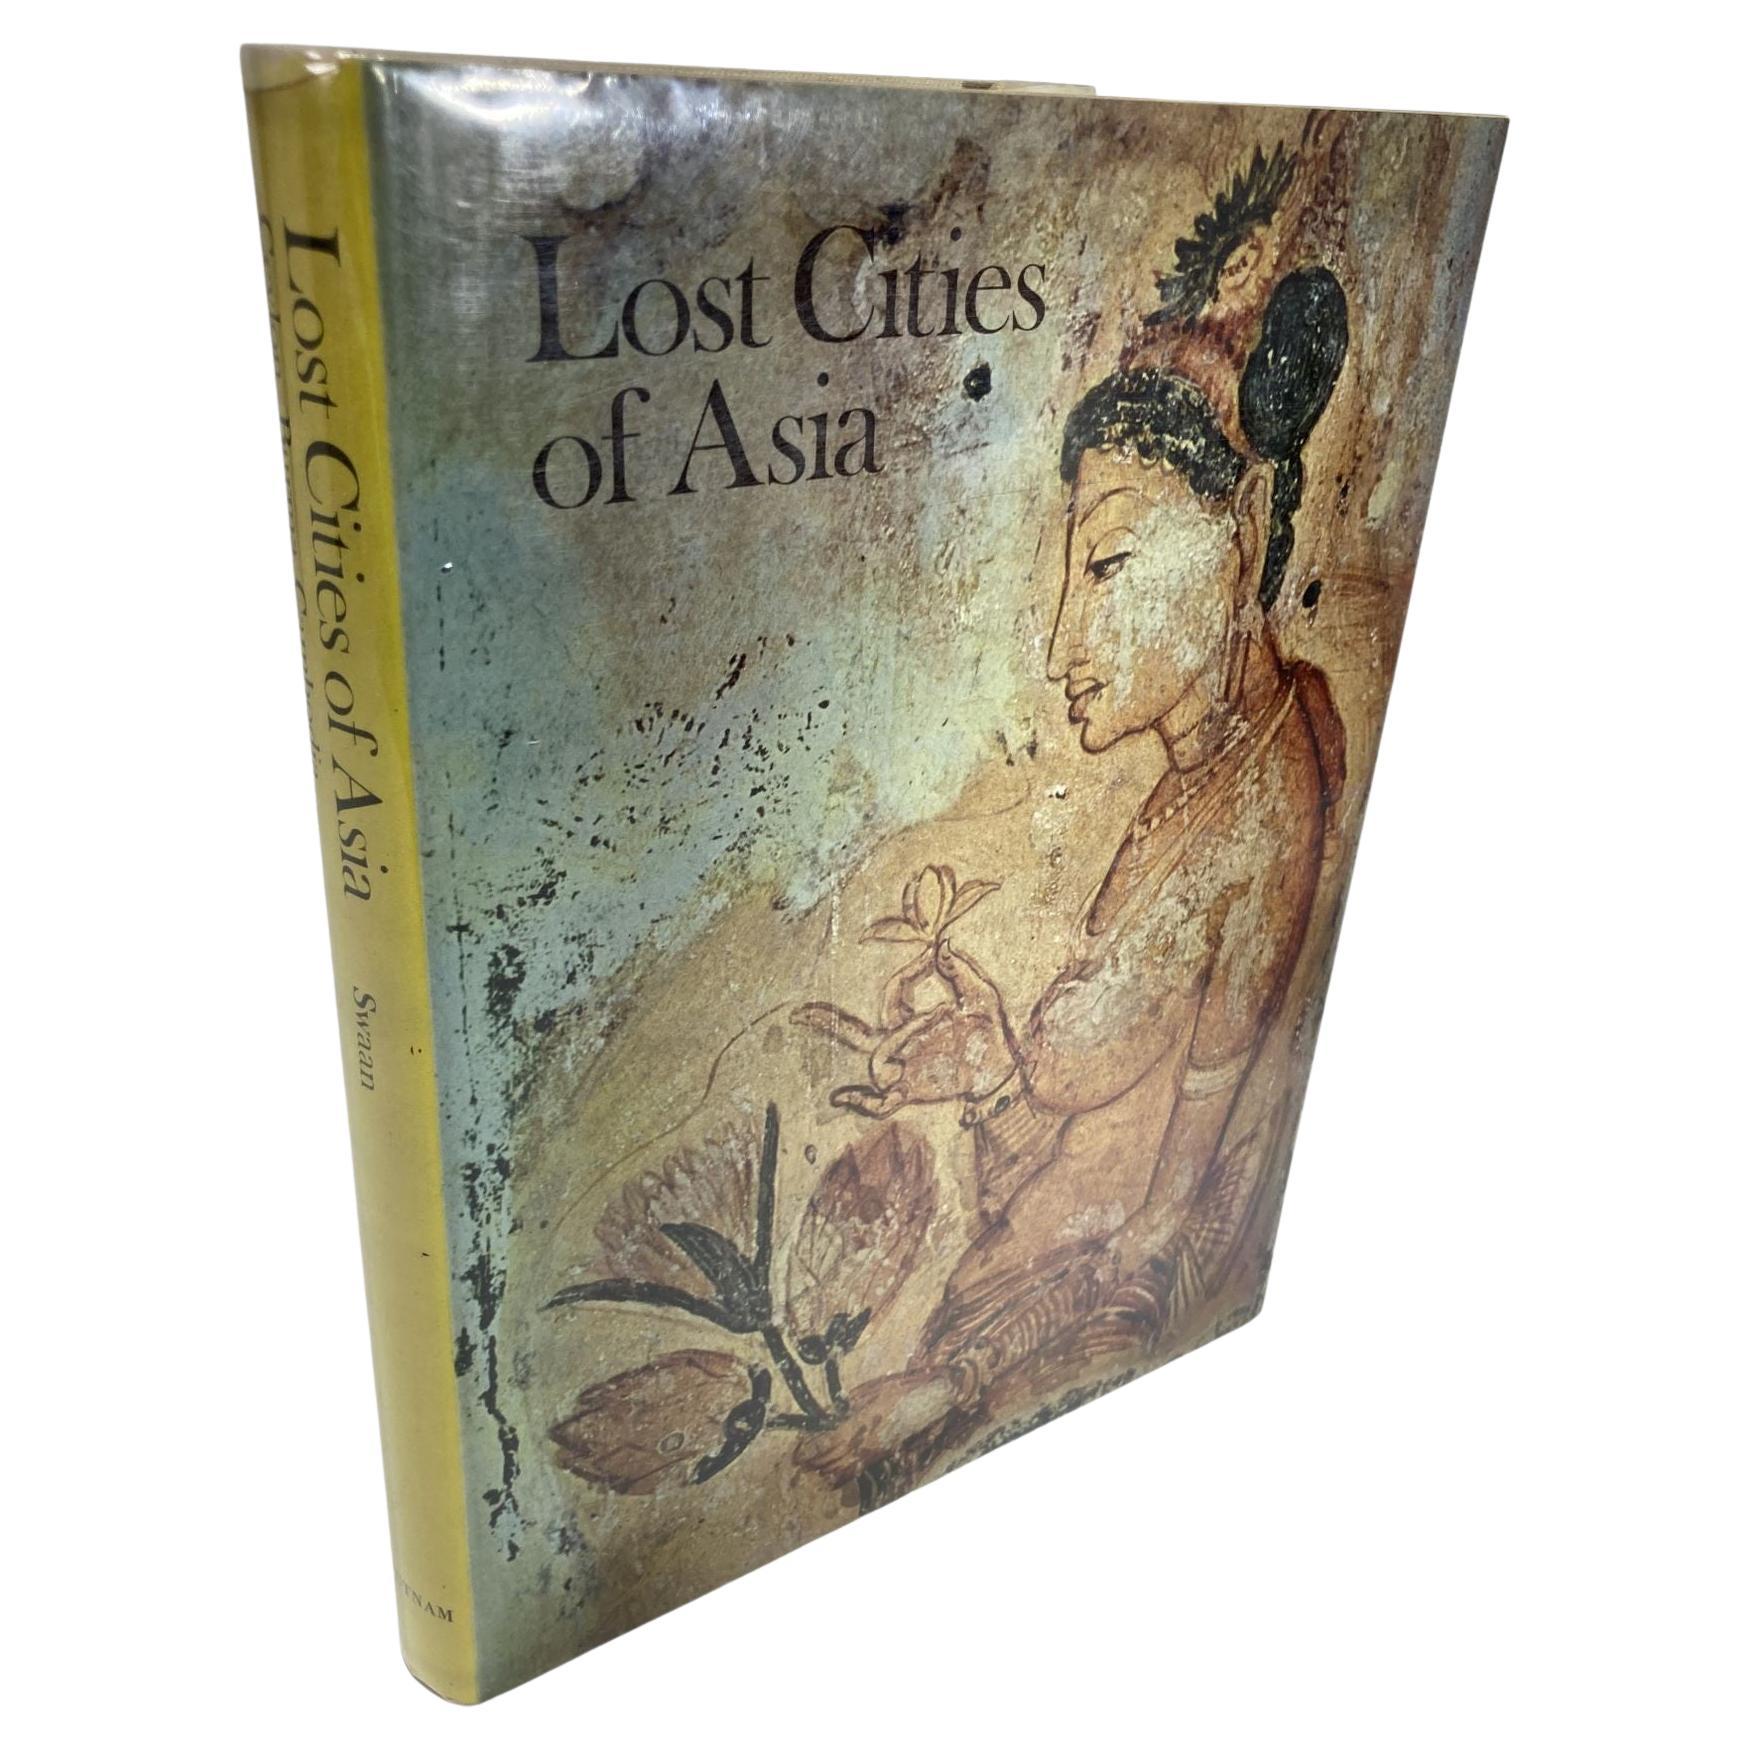 Lost Cities of Asia Hardcover Book 1st Edition 1966 by Wim Swaan For Sale